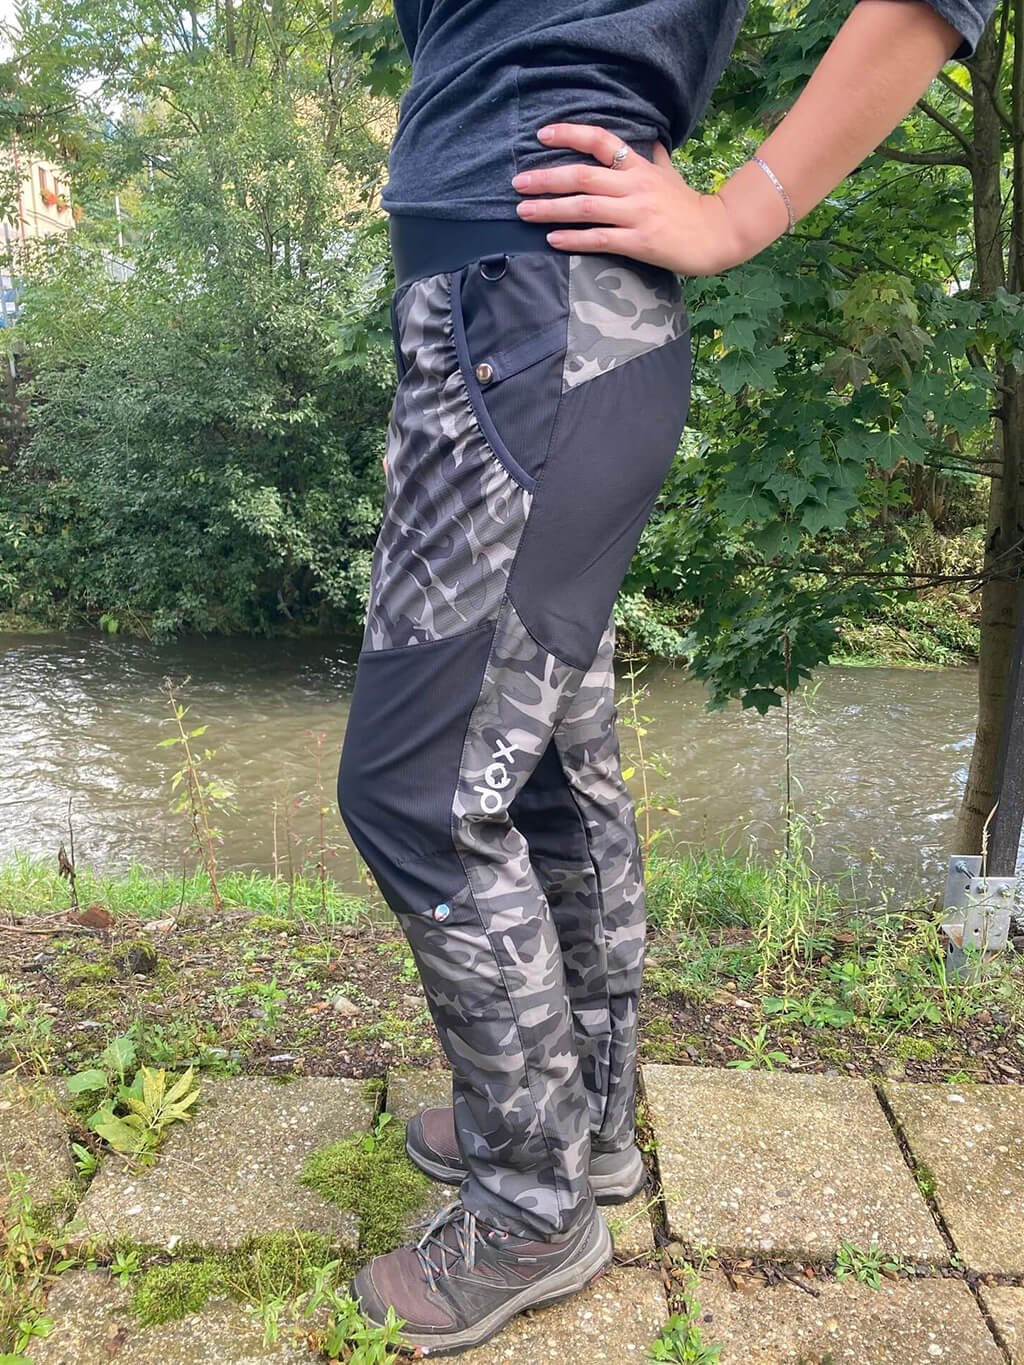 Women's training trousers SUMMER - camouflage